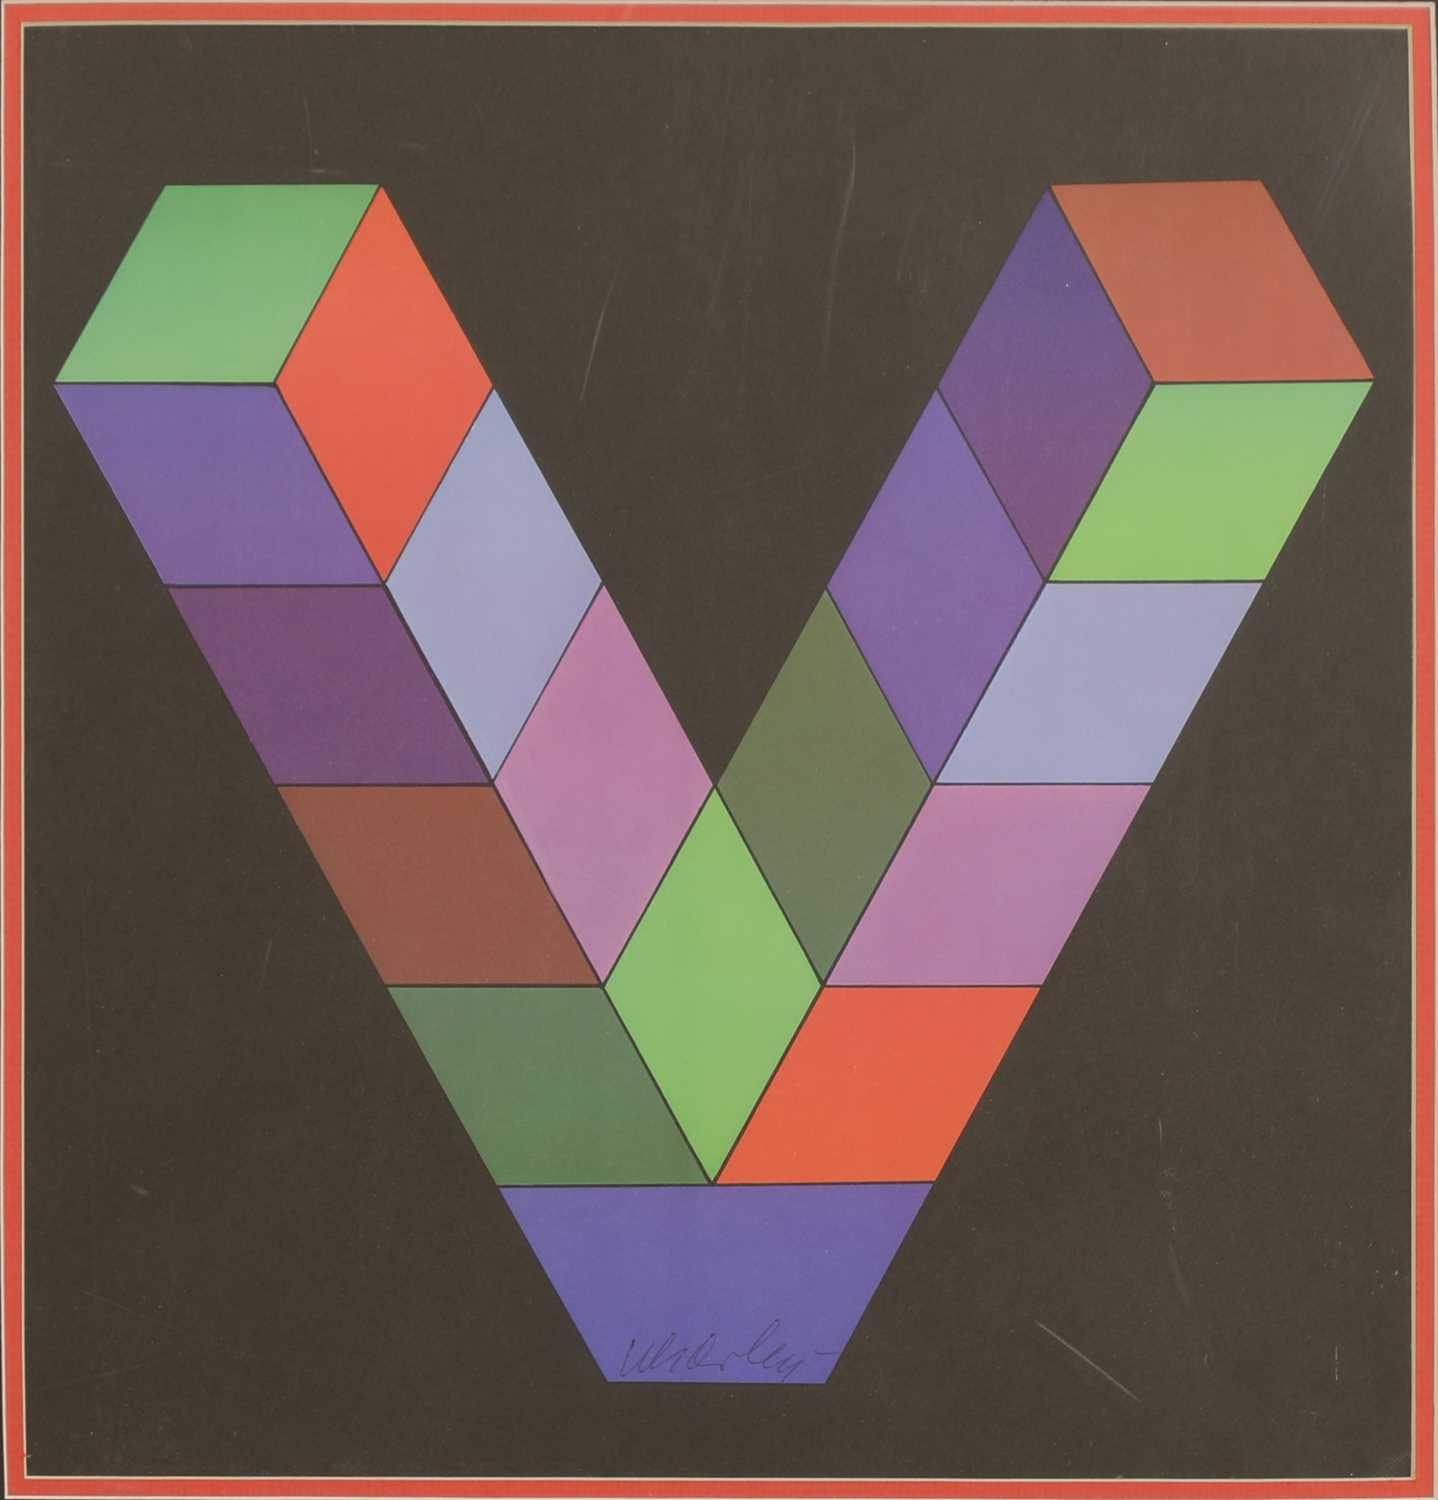 Victor Vasarely, Harlequin (ca. 1980), Available for Sale